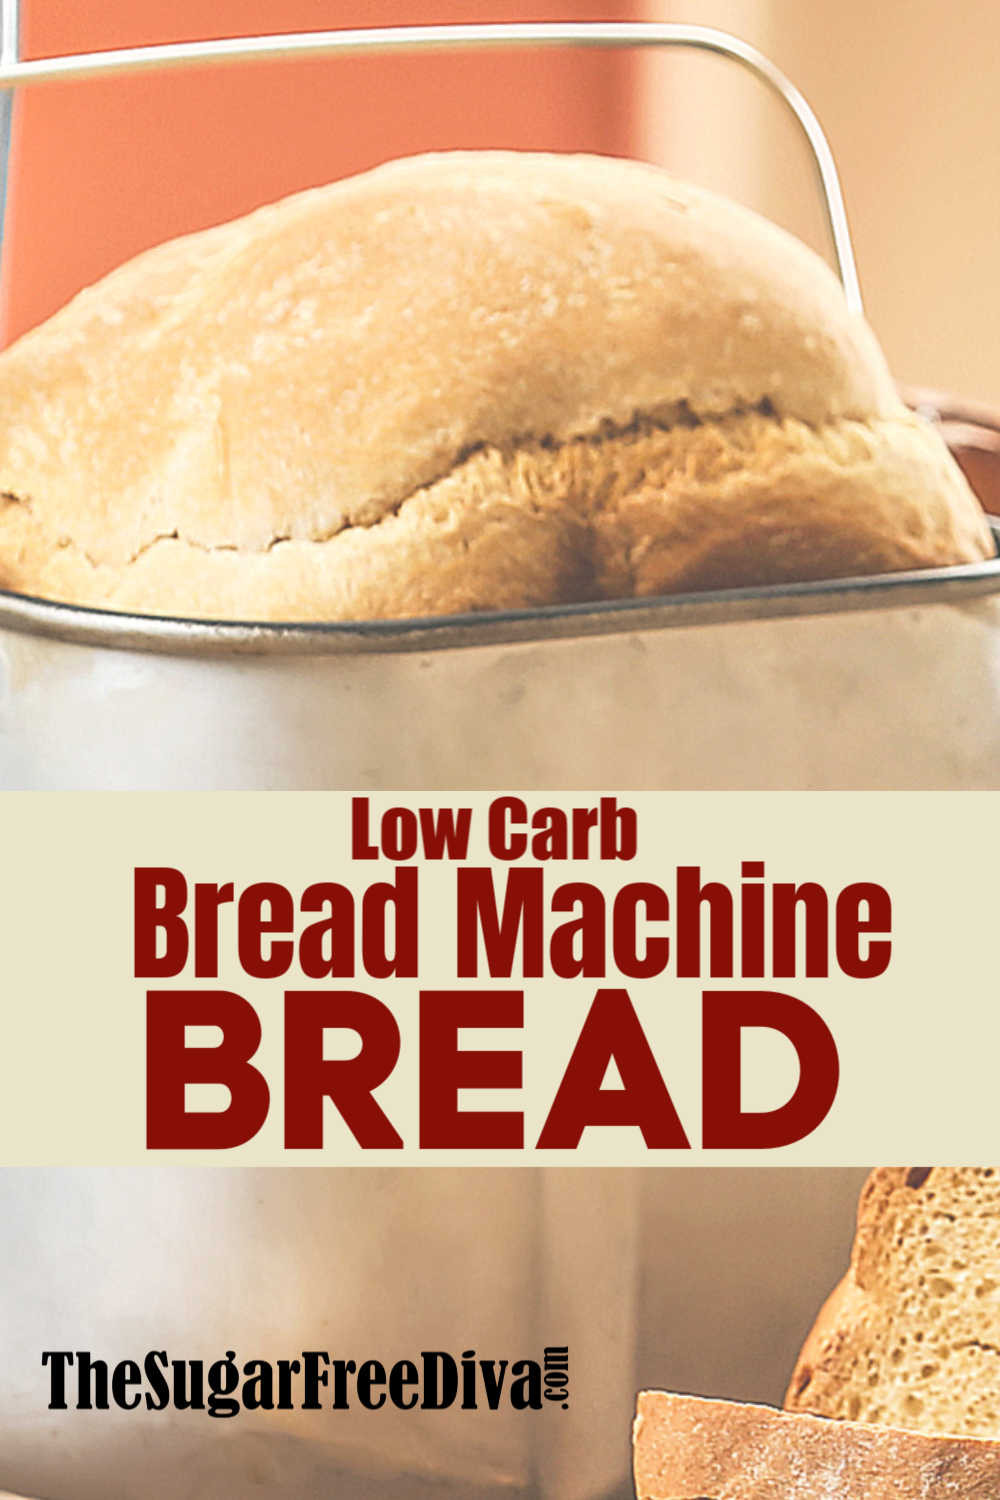 Bread Machine Low Carb Bread Best Of Recipe for Keto Bread for Bread Machine with Baking soda